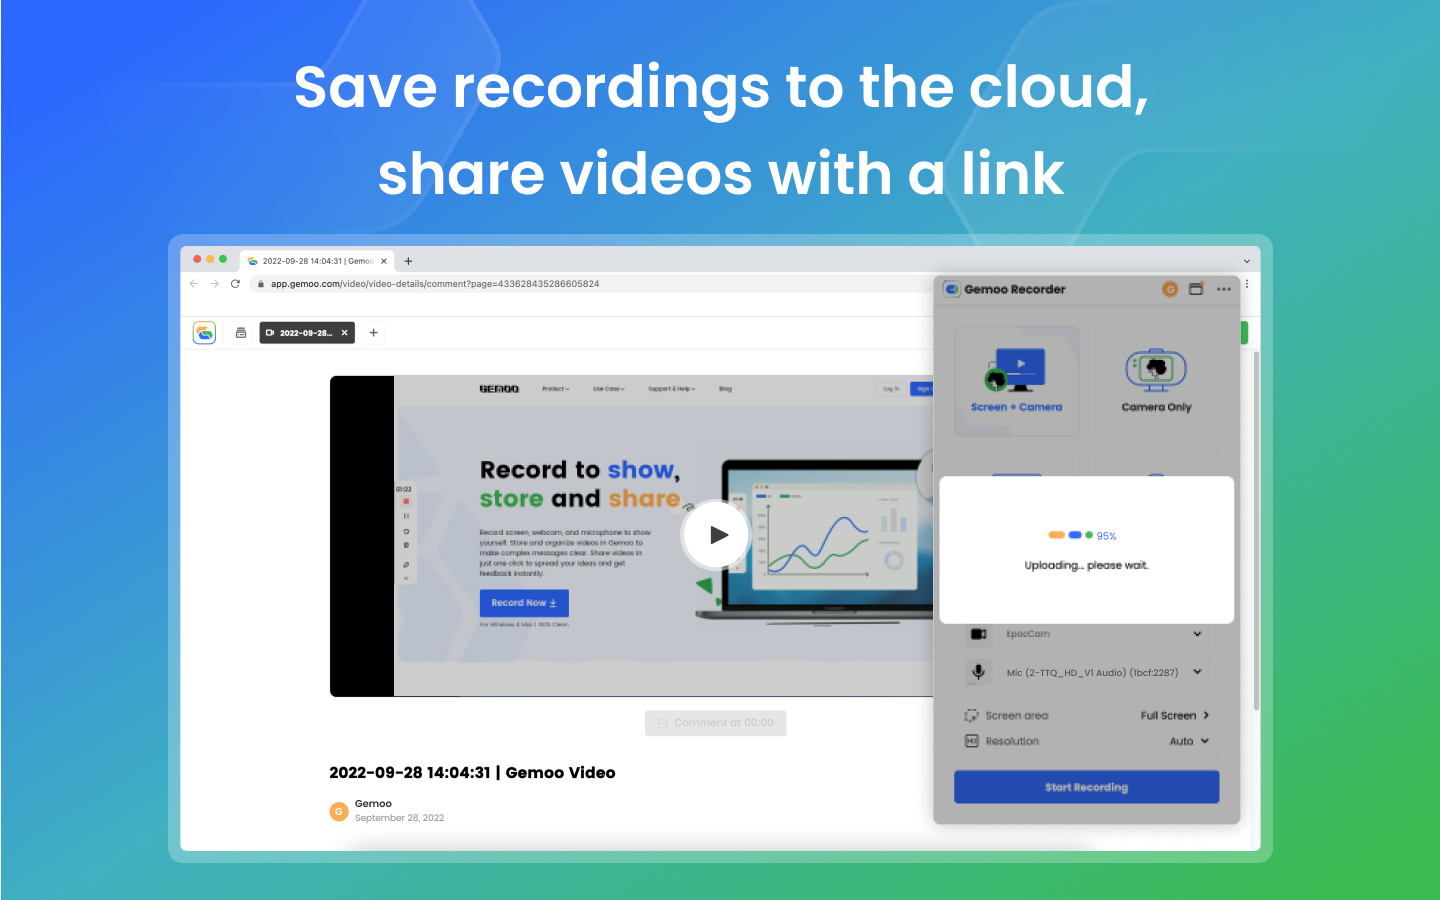 Save recordings to the cloud and share with a link